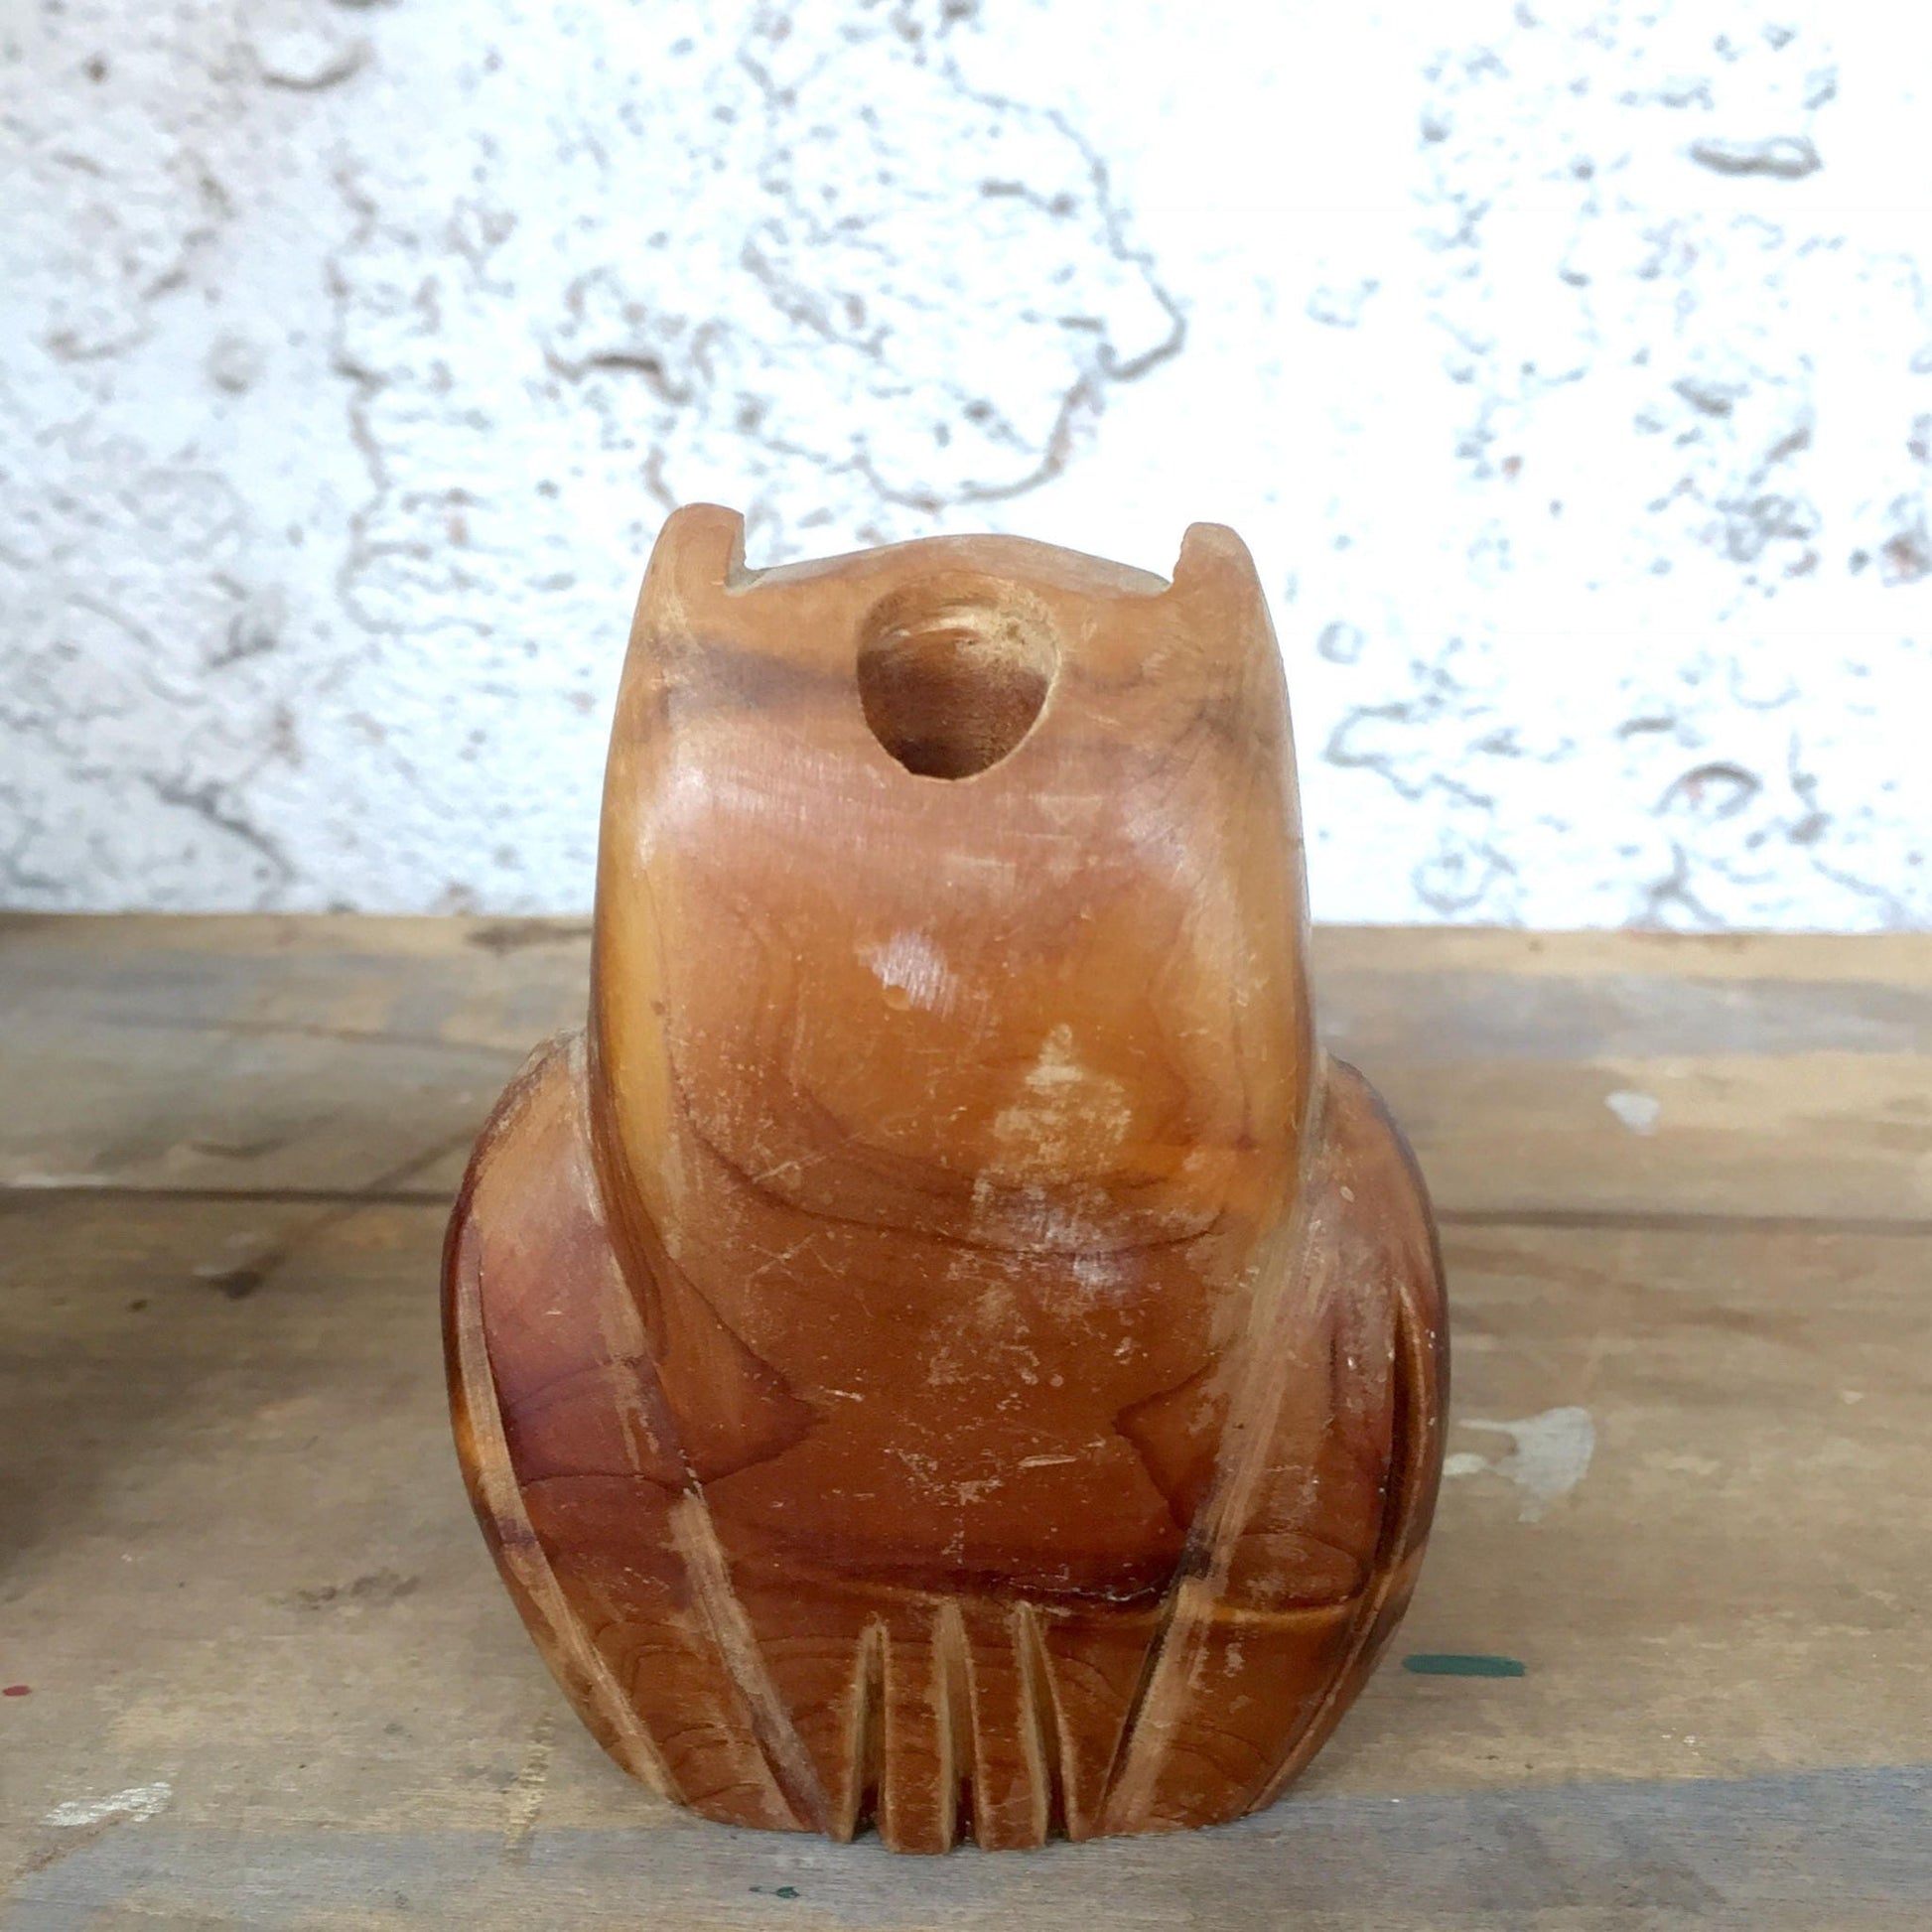 Vintage hand-carved wooden owl figurine with a hollow center, serving as a rustic pencil holder or desk organizer. The owl has a rounded shape with incised details resembling feathers and large circular eyes. The warm brown wood tones show natural grain and weathering. Positioned on a wooden surface against a textured white background.